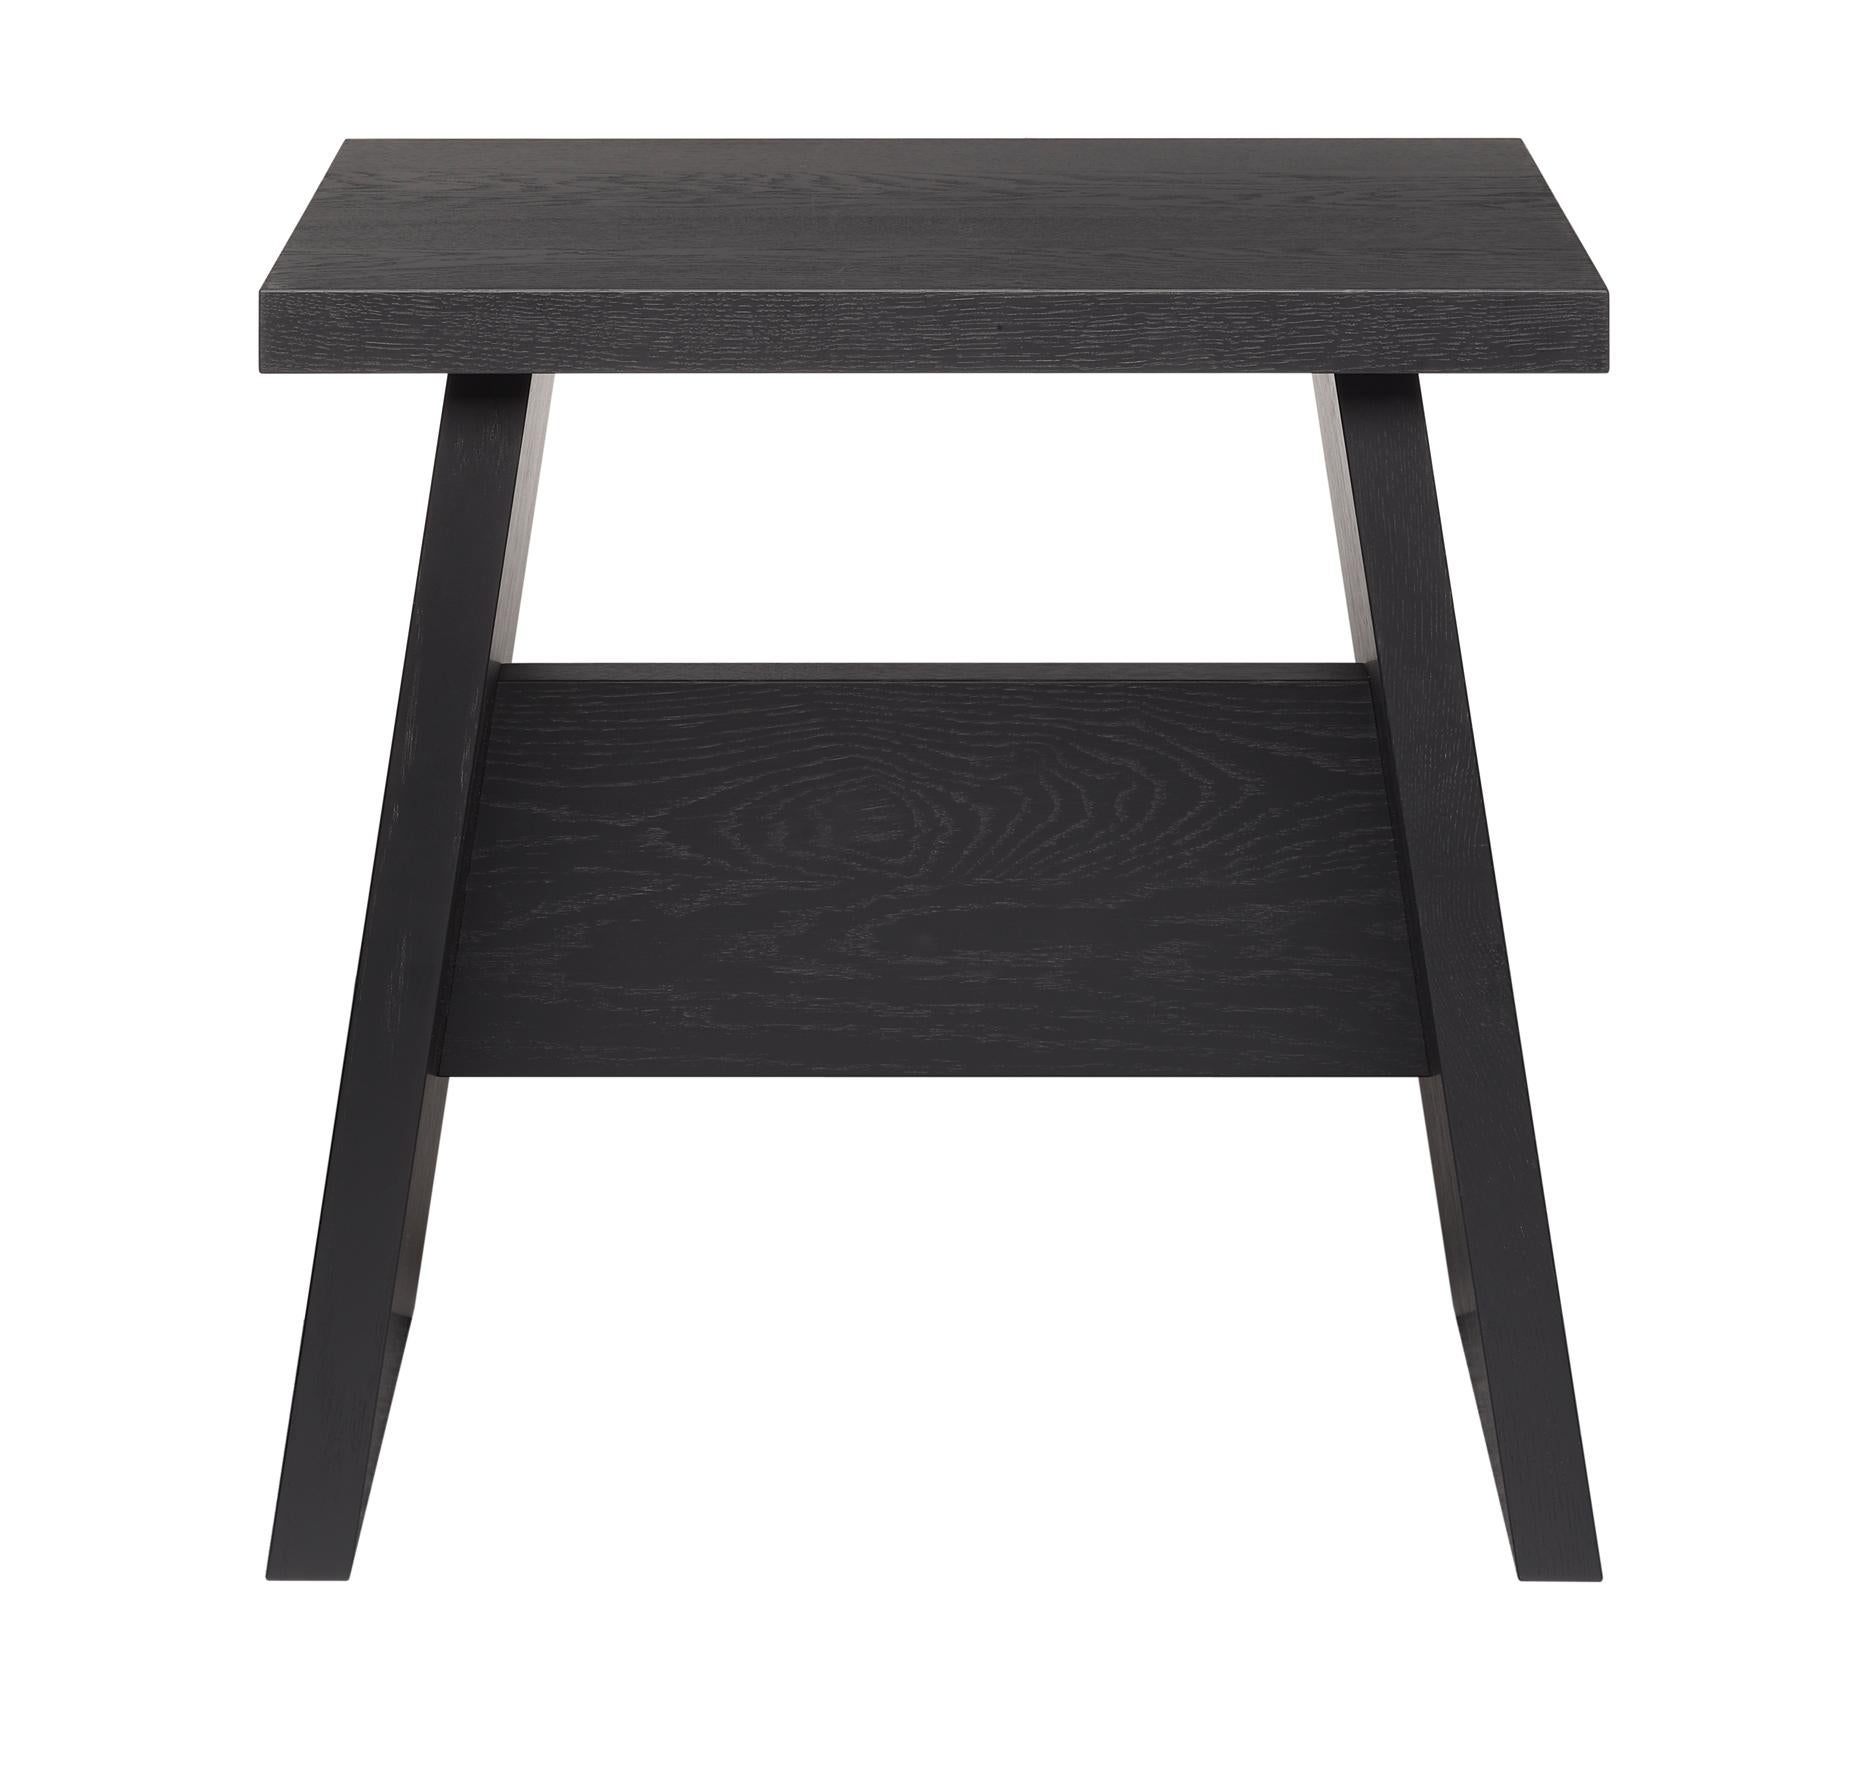 For Sale: Black (Jet Black Stained Lacquer) e15 Langley Wood Side Table by David Chipperfield 2